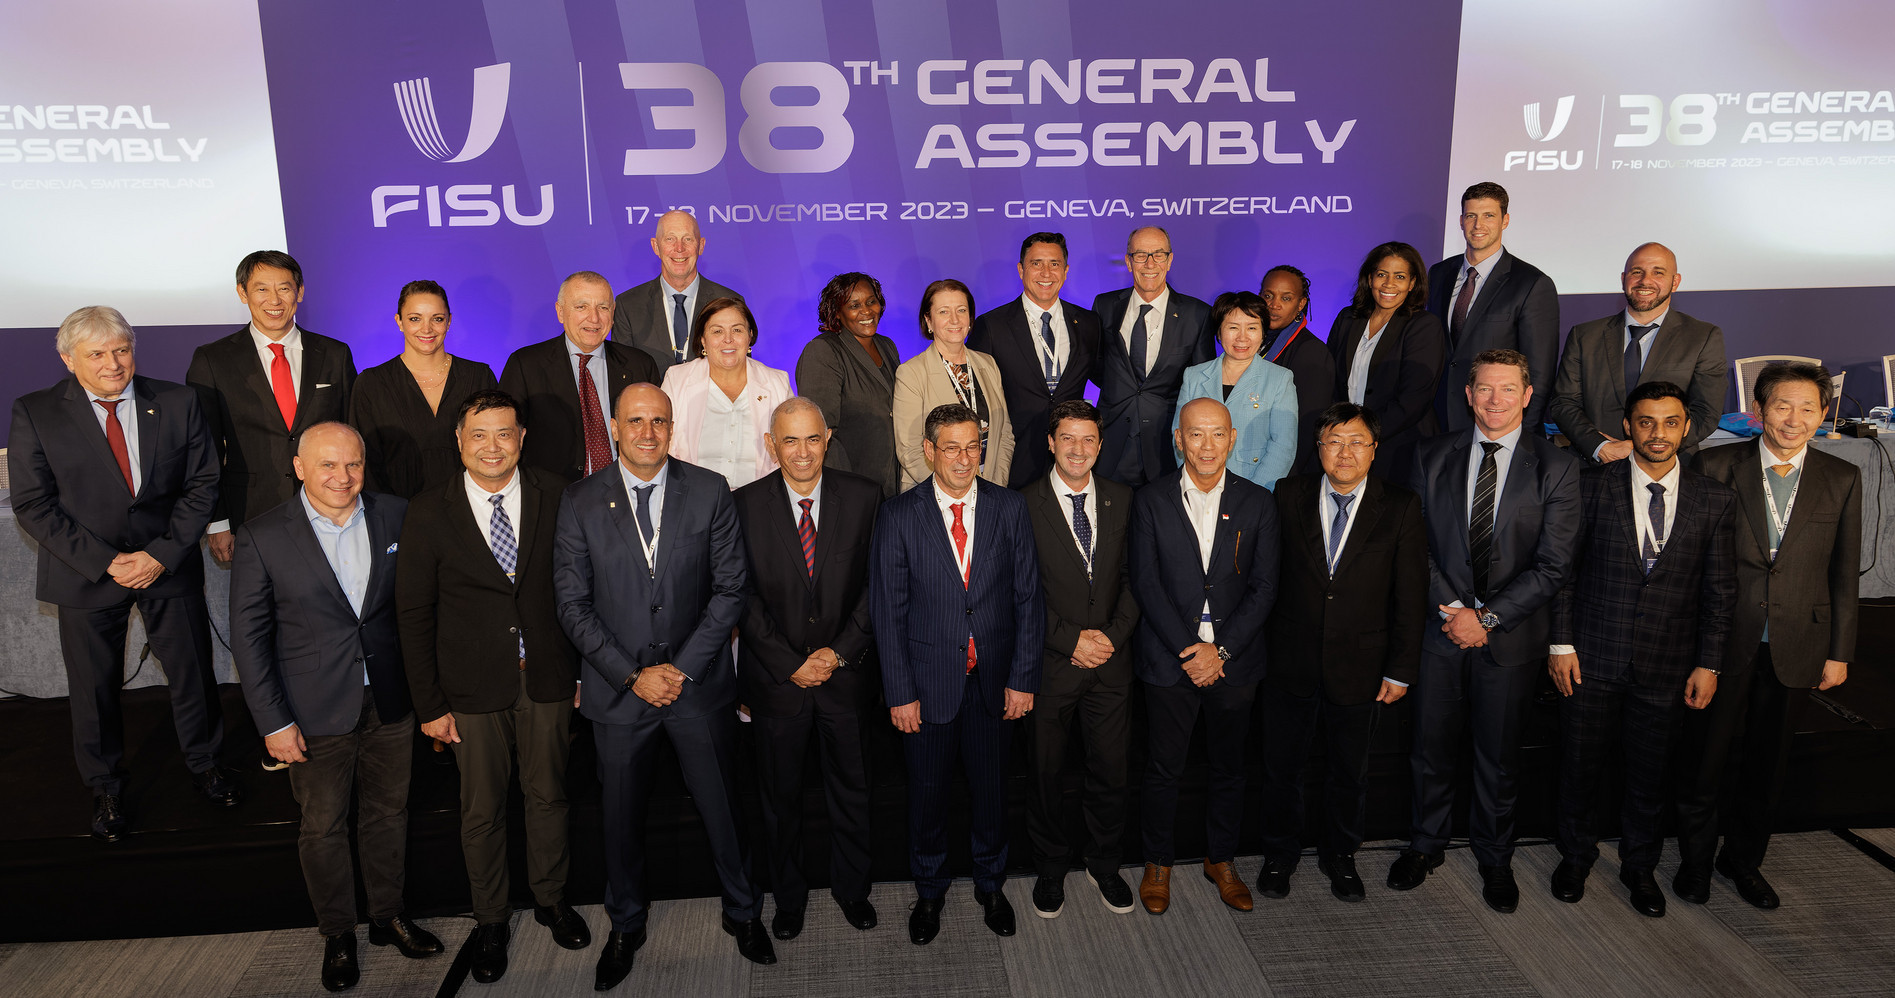 Official picture of the 38th FISU General Assembly in Geneva. FISU